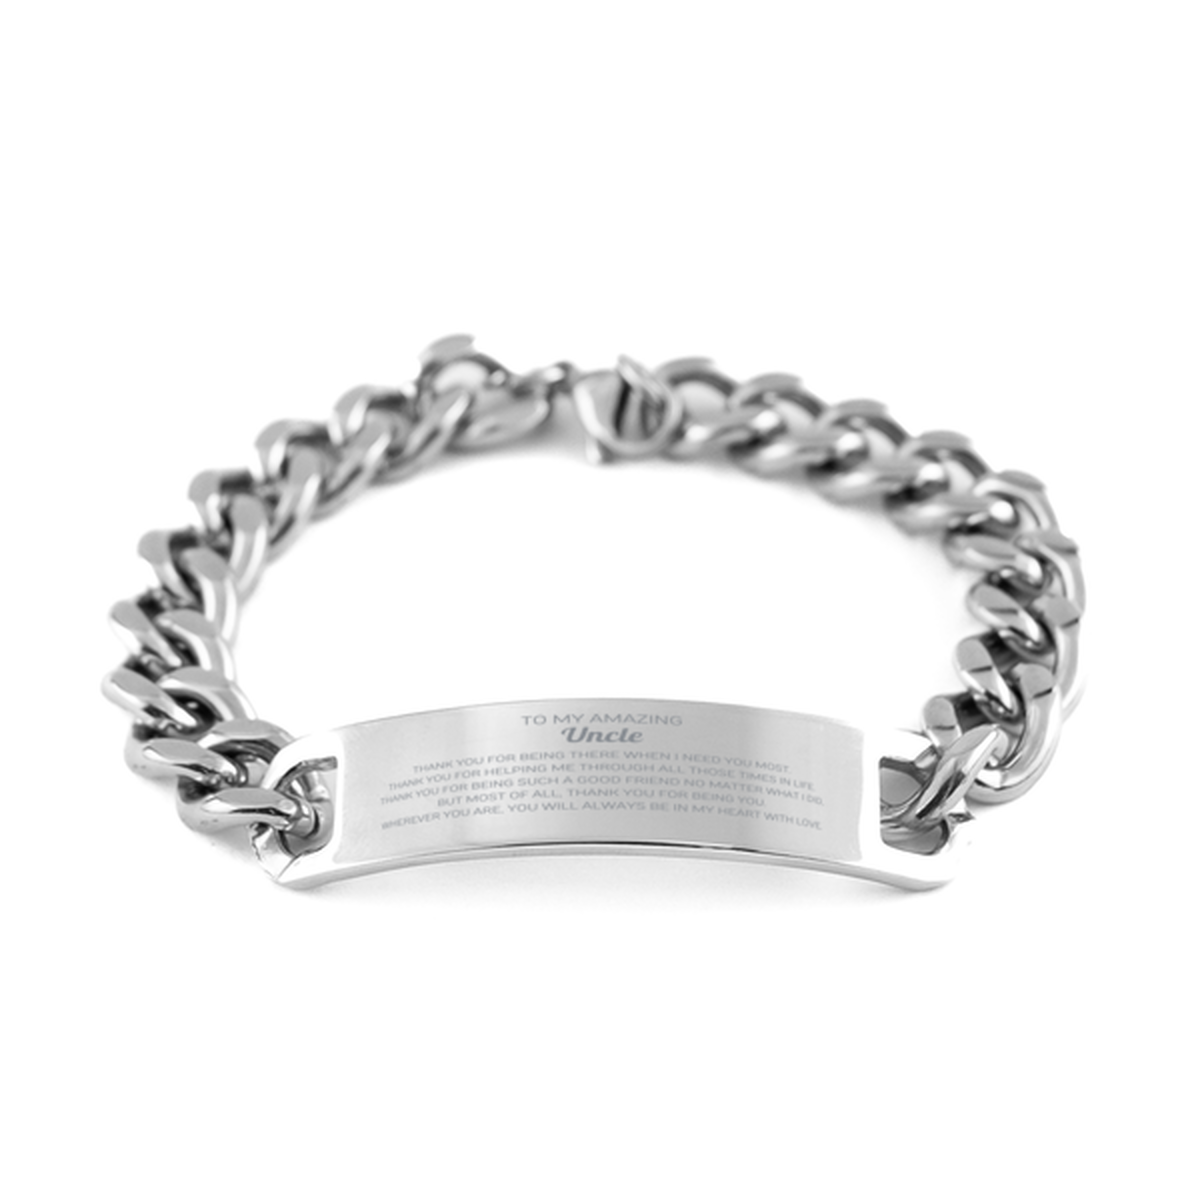 To My Amazing Uncle Cuban Chain Stainless Steel Bracelet, Thank you for being there, Thank You Gifts For Uncle, Birthday, Christmas Unique Gifts For Uncle